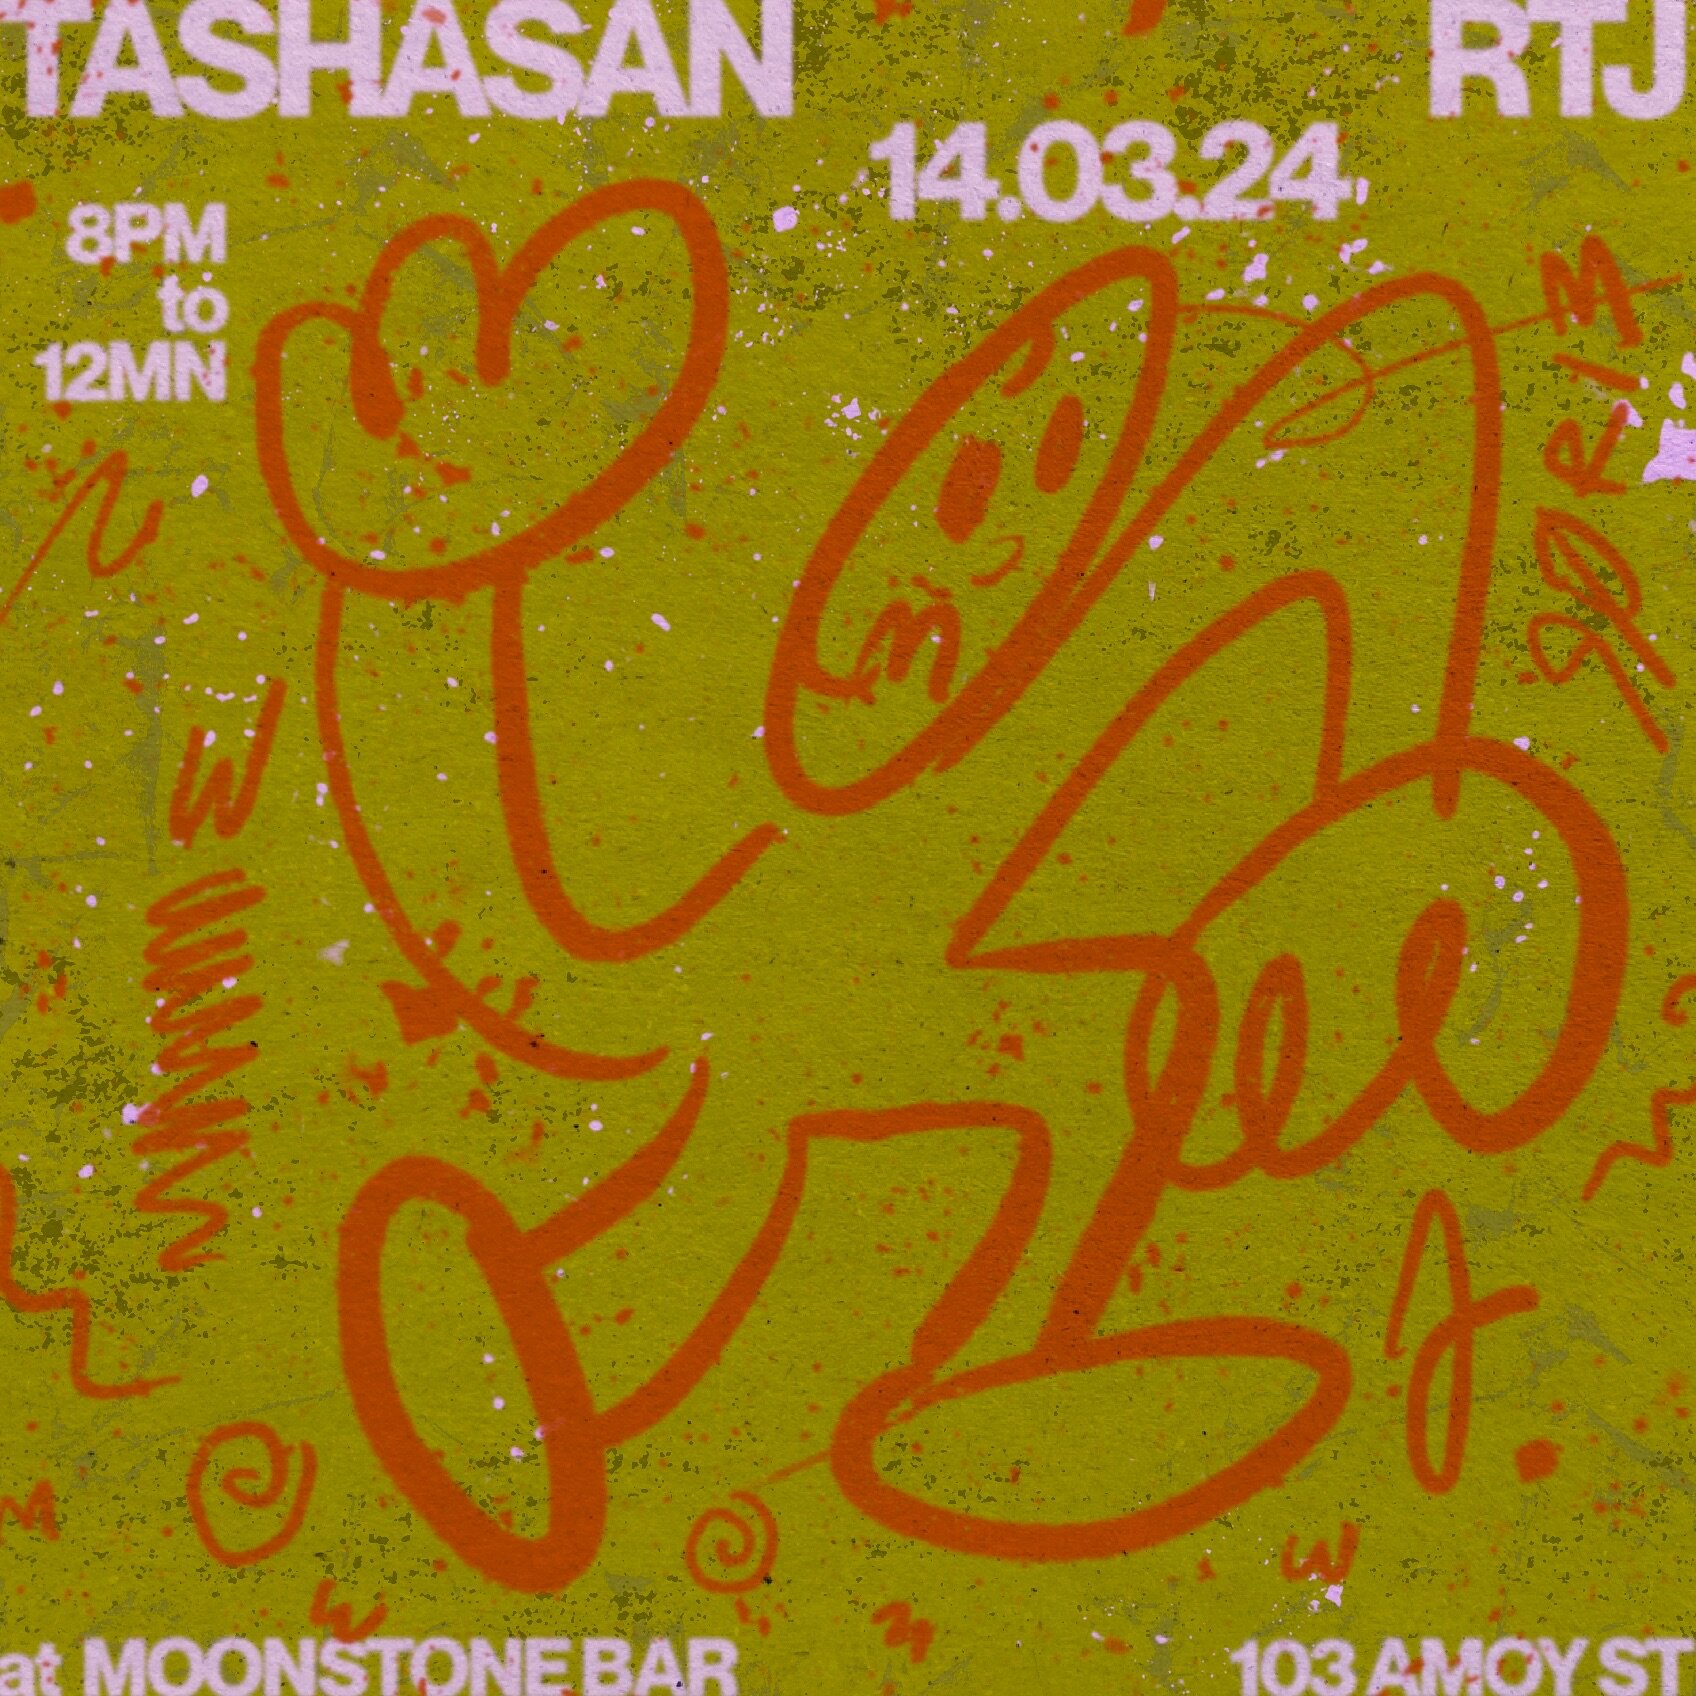 TASHASAN B2B RTJ - THU 14 MAR - 8PM TO 12MN 

Singapore-born and bred Natasha Hassan, aka TASHASAN, is an illustrator and promoter turned DJ after spending enough time watching her producer and DJ friends in action. Her music is a blend of genres, in